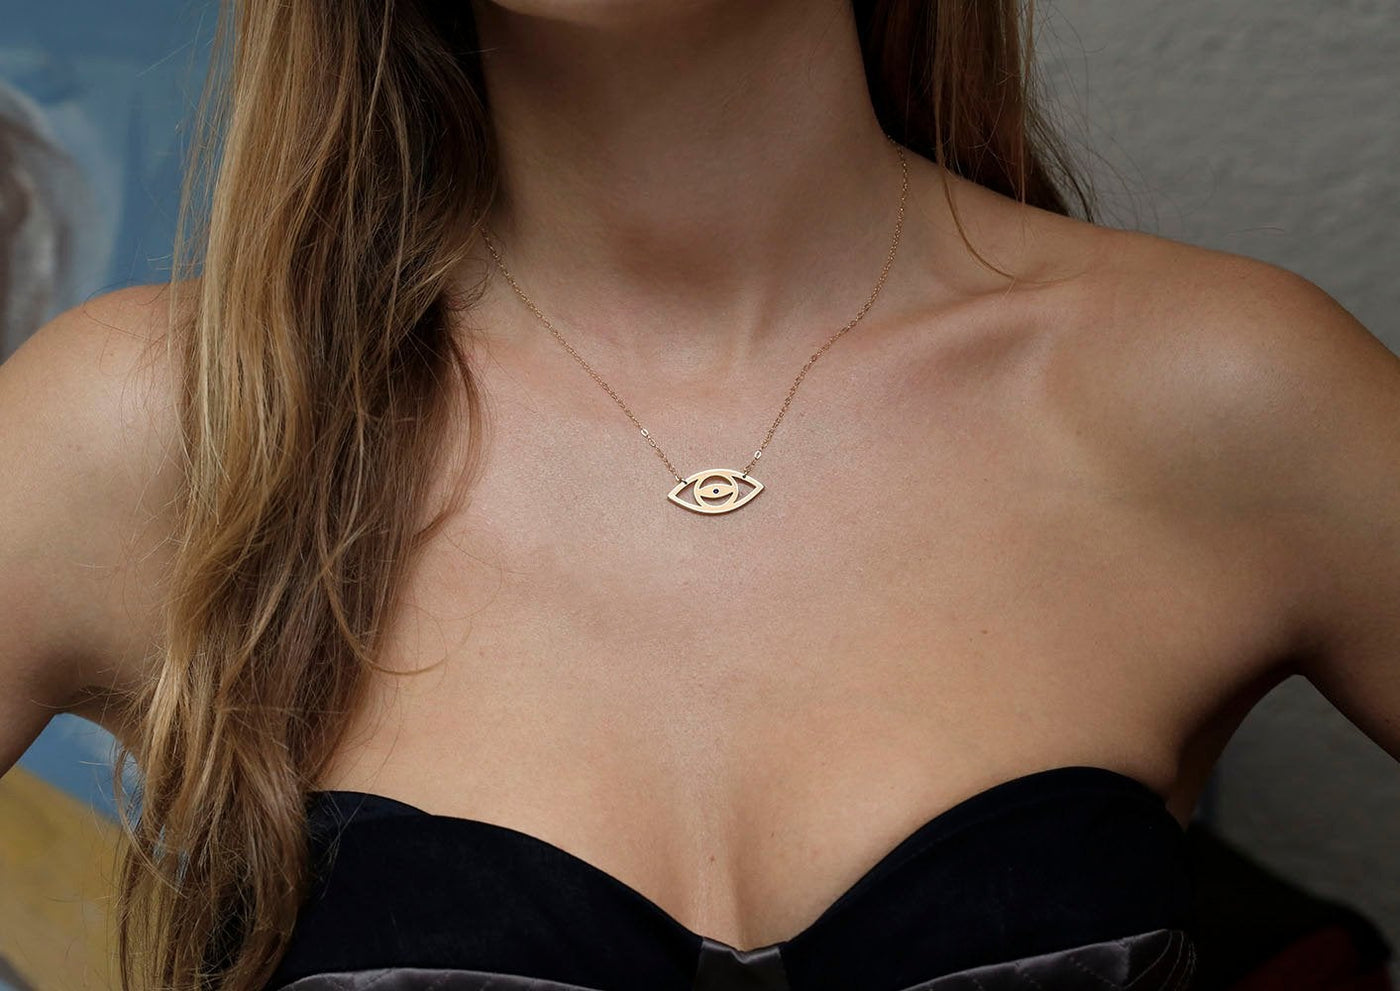 Gold eye silhouette necklace with round blue sapphire